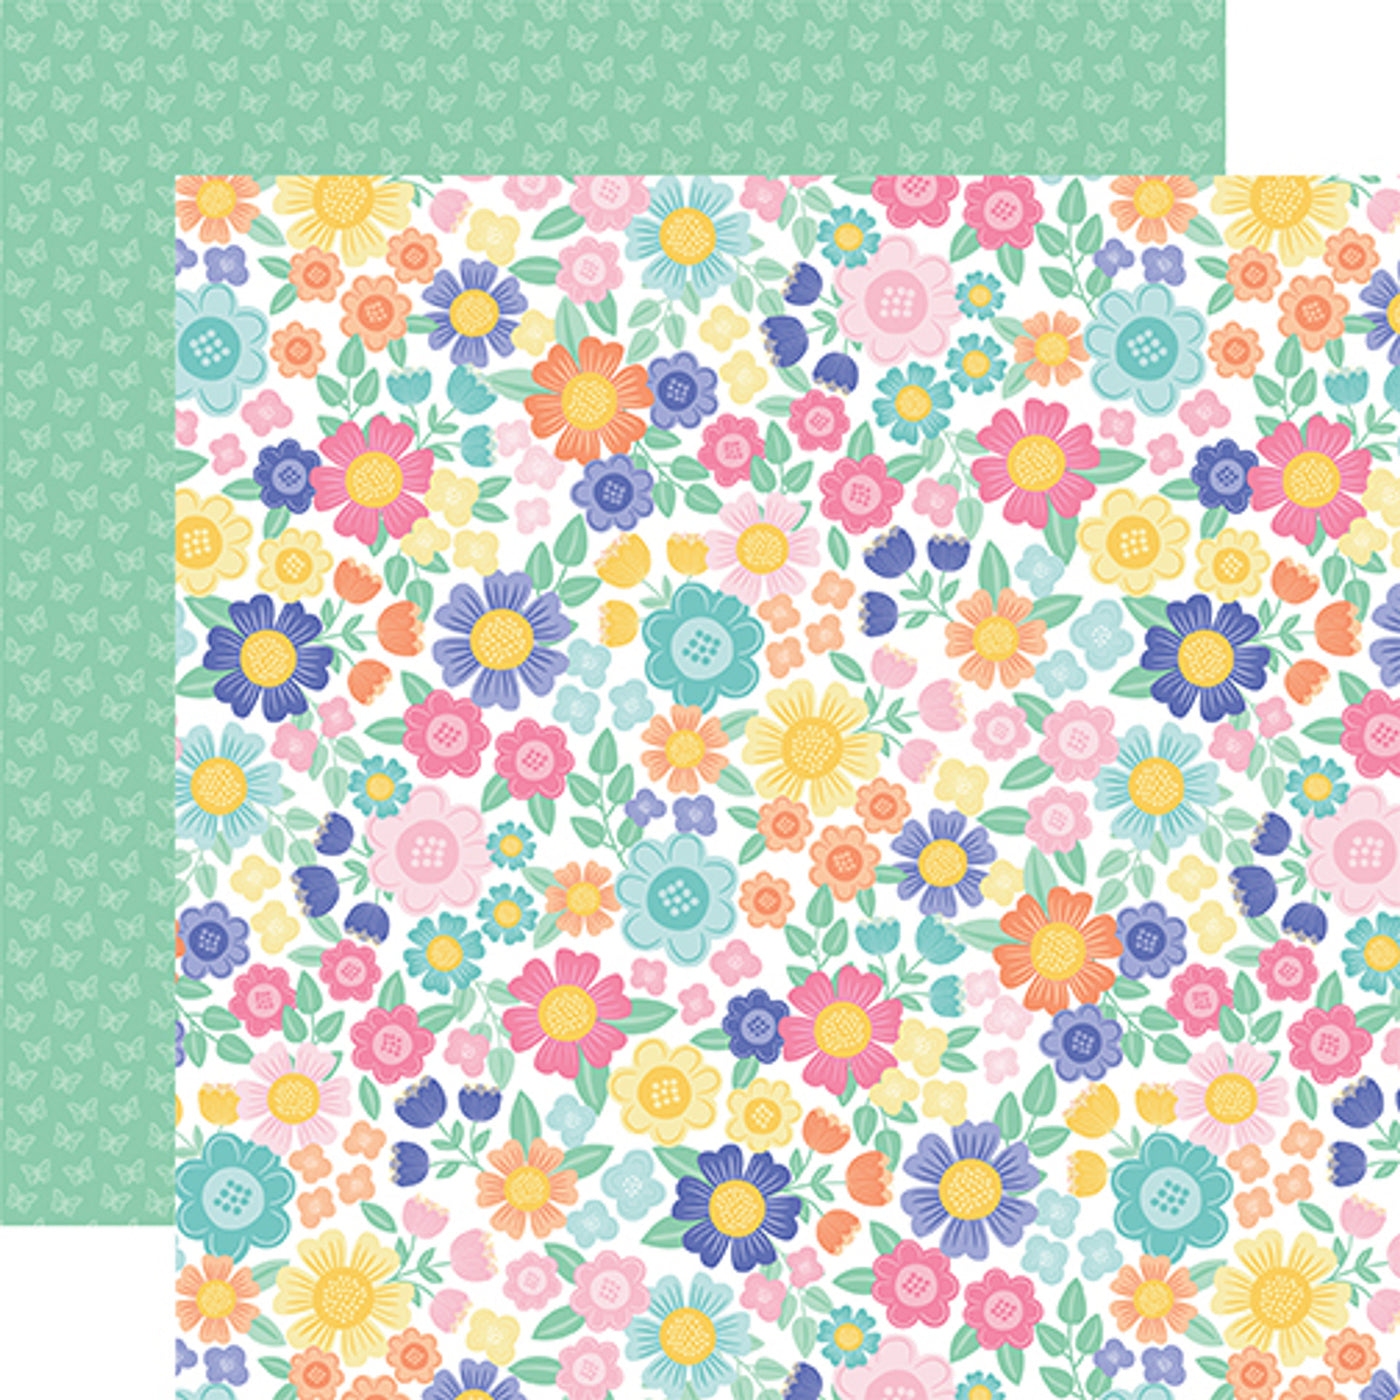 12x12 double-sided patterned paper. (Side A - bright flowers with green leaves on a white background, Side B - little white butterflies on a mint green background)